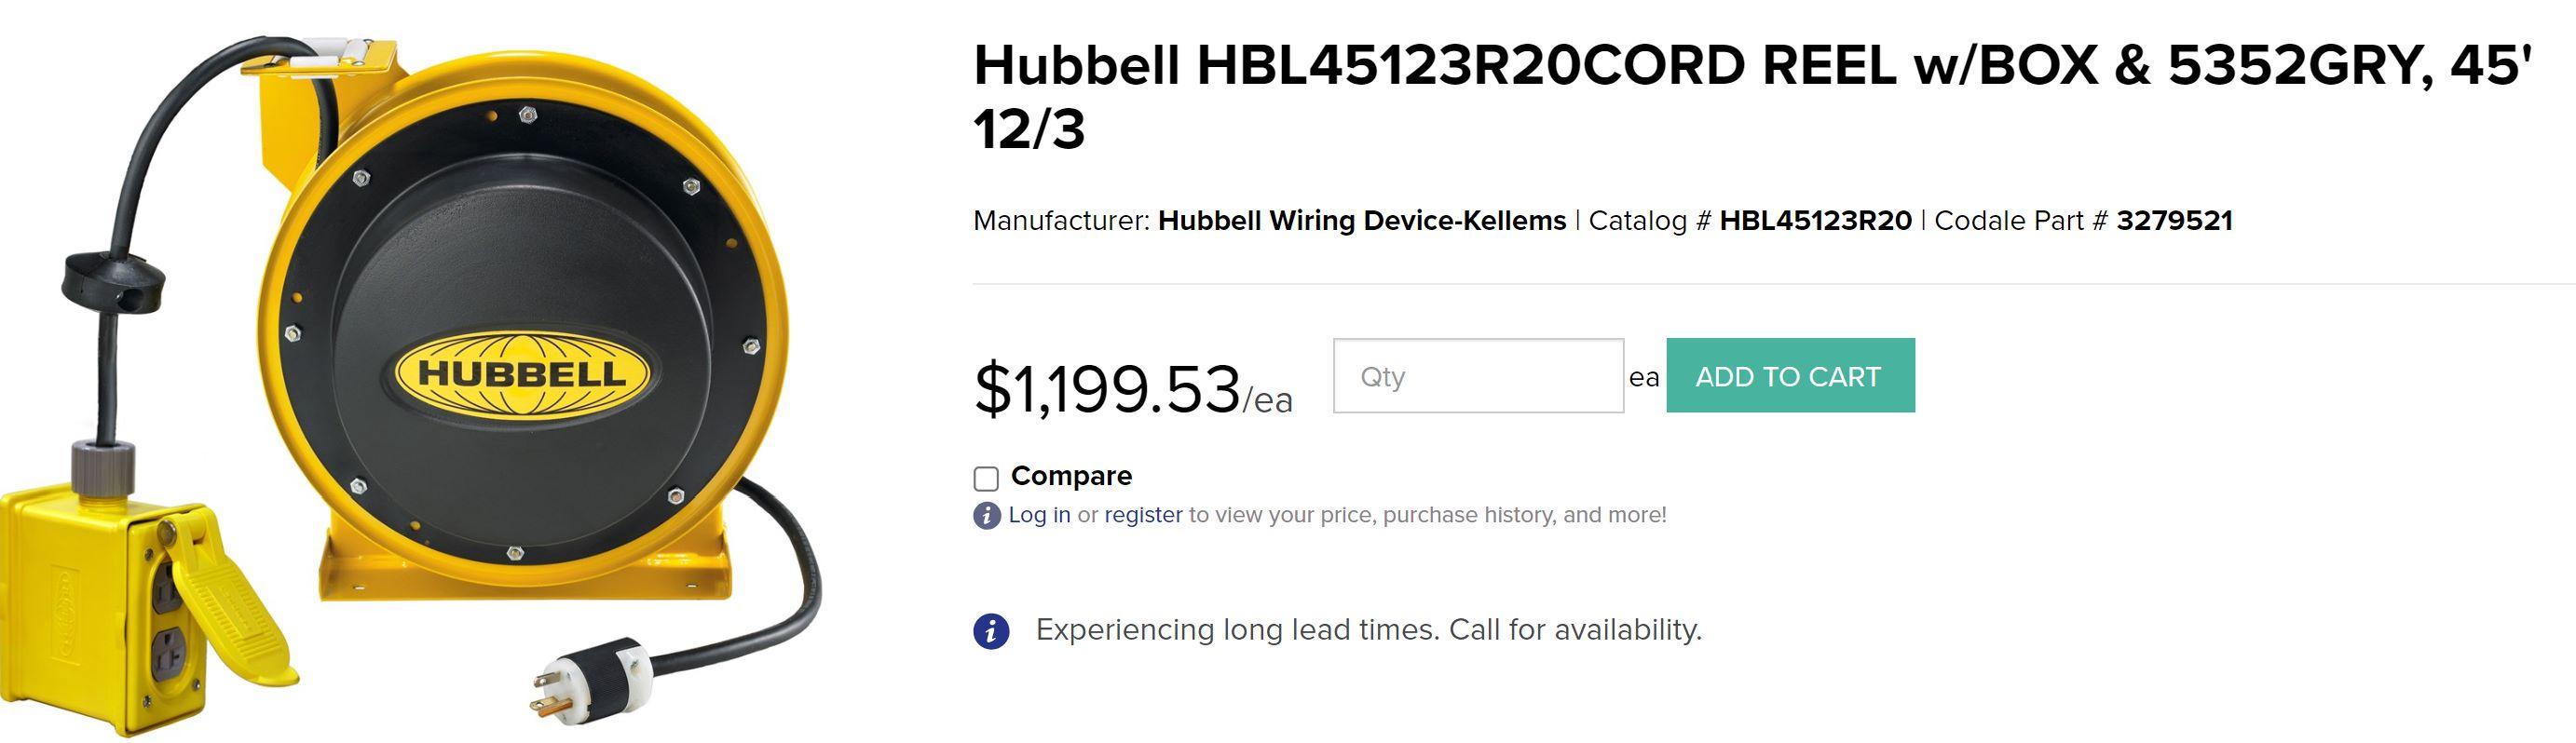 HUBBBELL INDUSTRIAL CORD REEL W/ 45' 12 AWG/3C 20AMP 125V MODEL # HBL45123R20